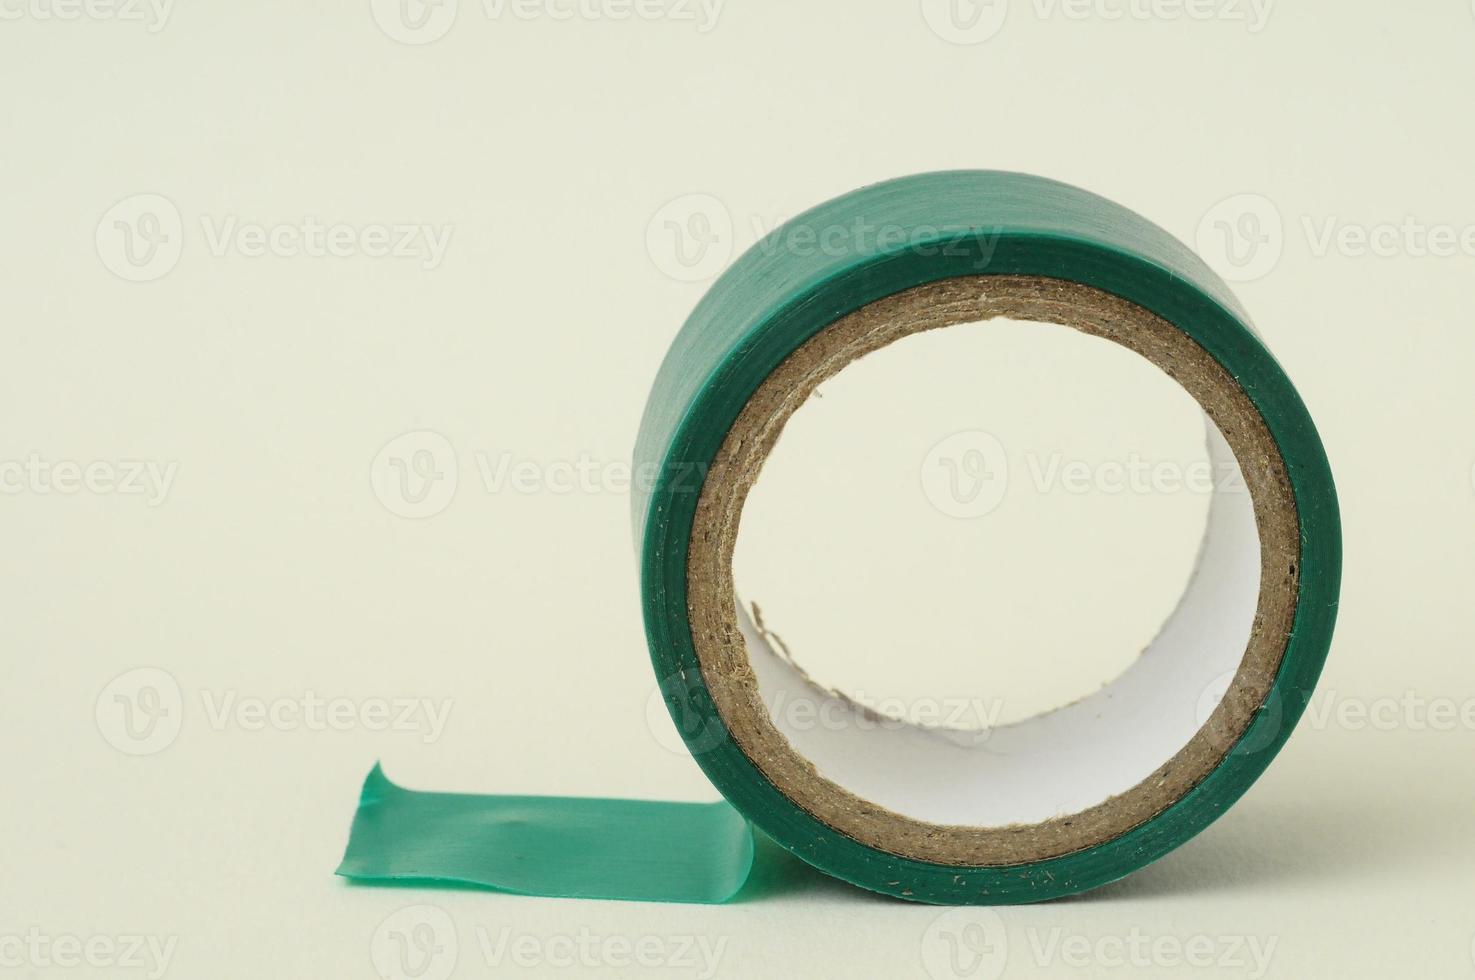 Roll of adhesive tape photo